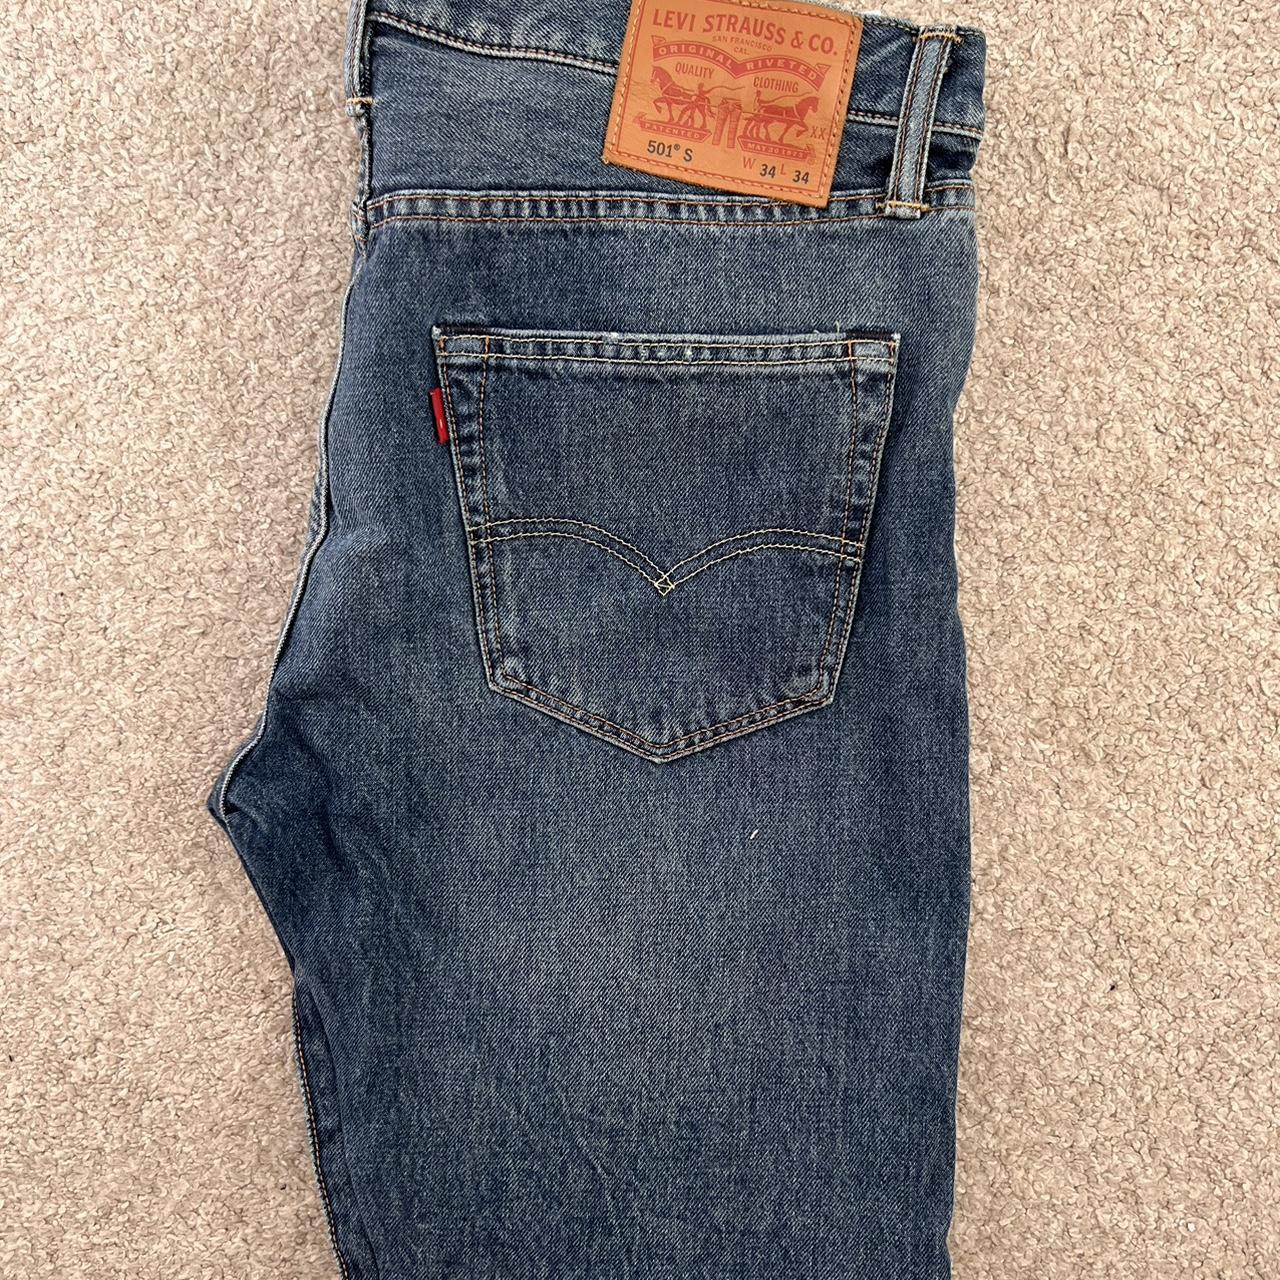 Levis 501 Jeans Slim Fit In Great Condition Barely Depop 